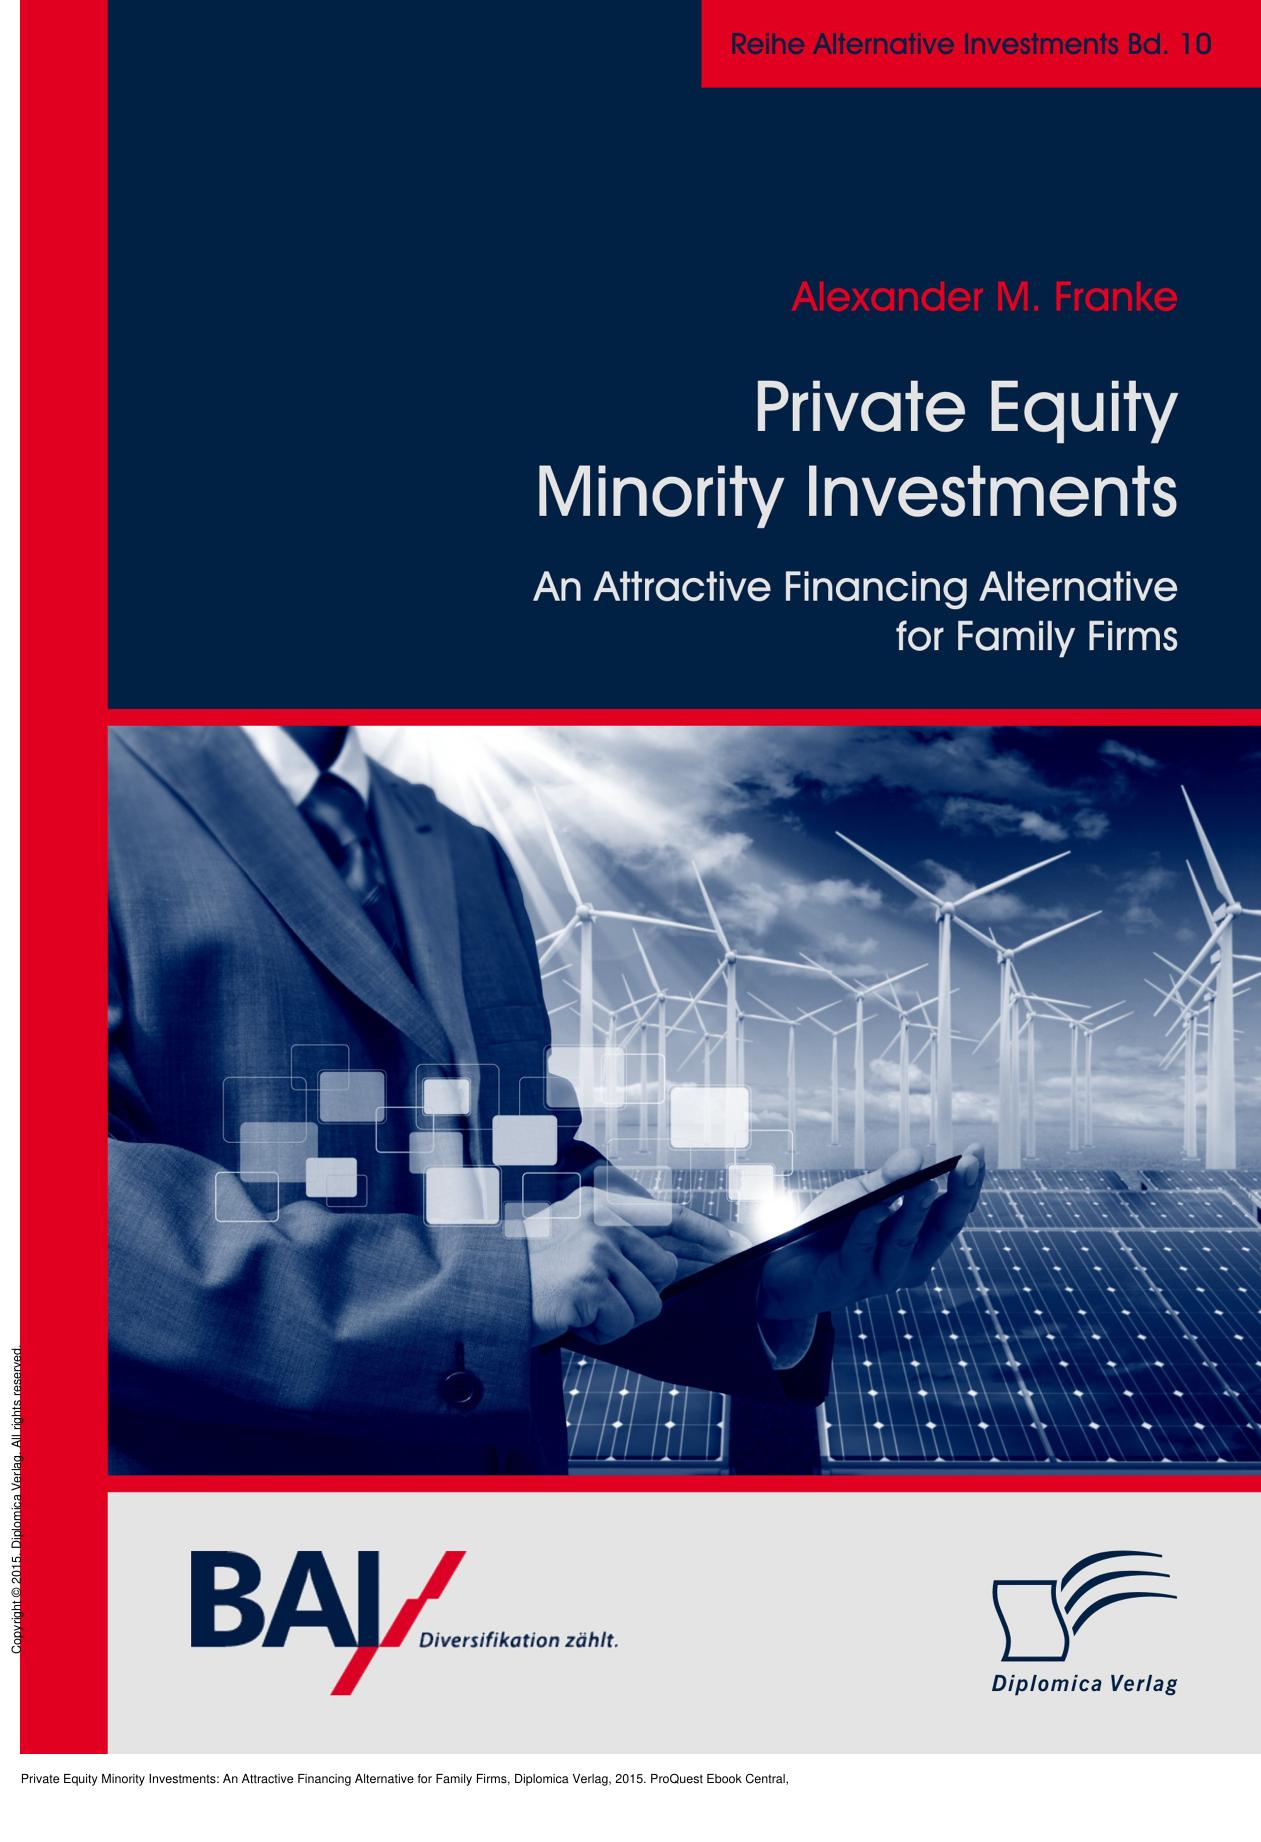 Private Equity Minority Investments: An Attractive Financing Alternative for Family Firms by Alexander M. Franke